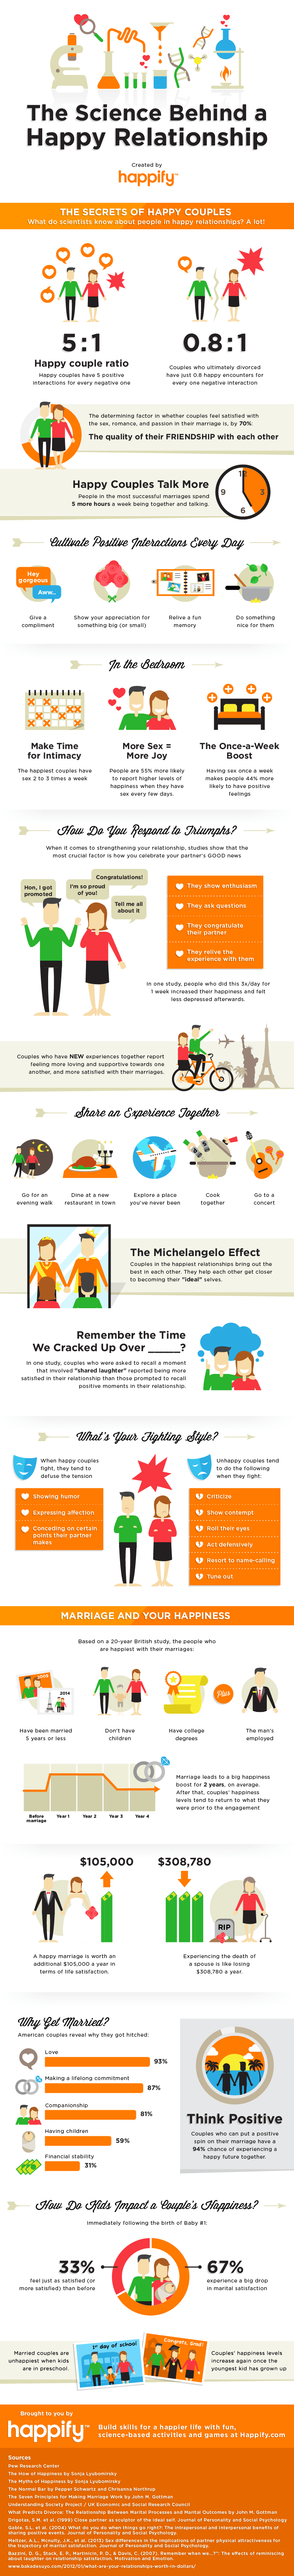 Science Behind A Happy Relationship